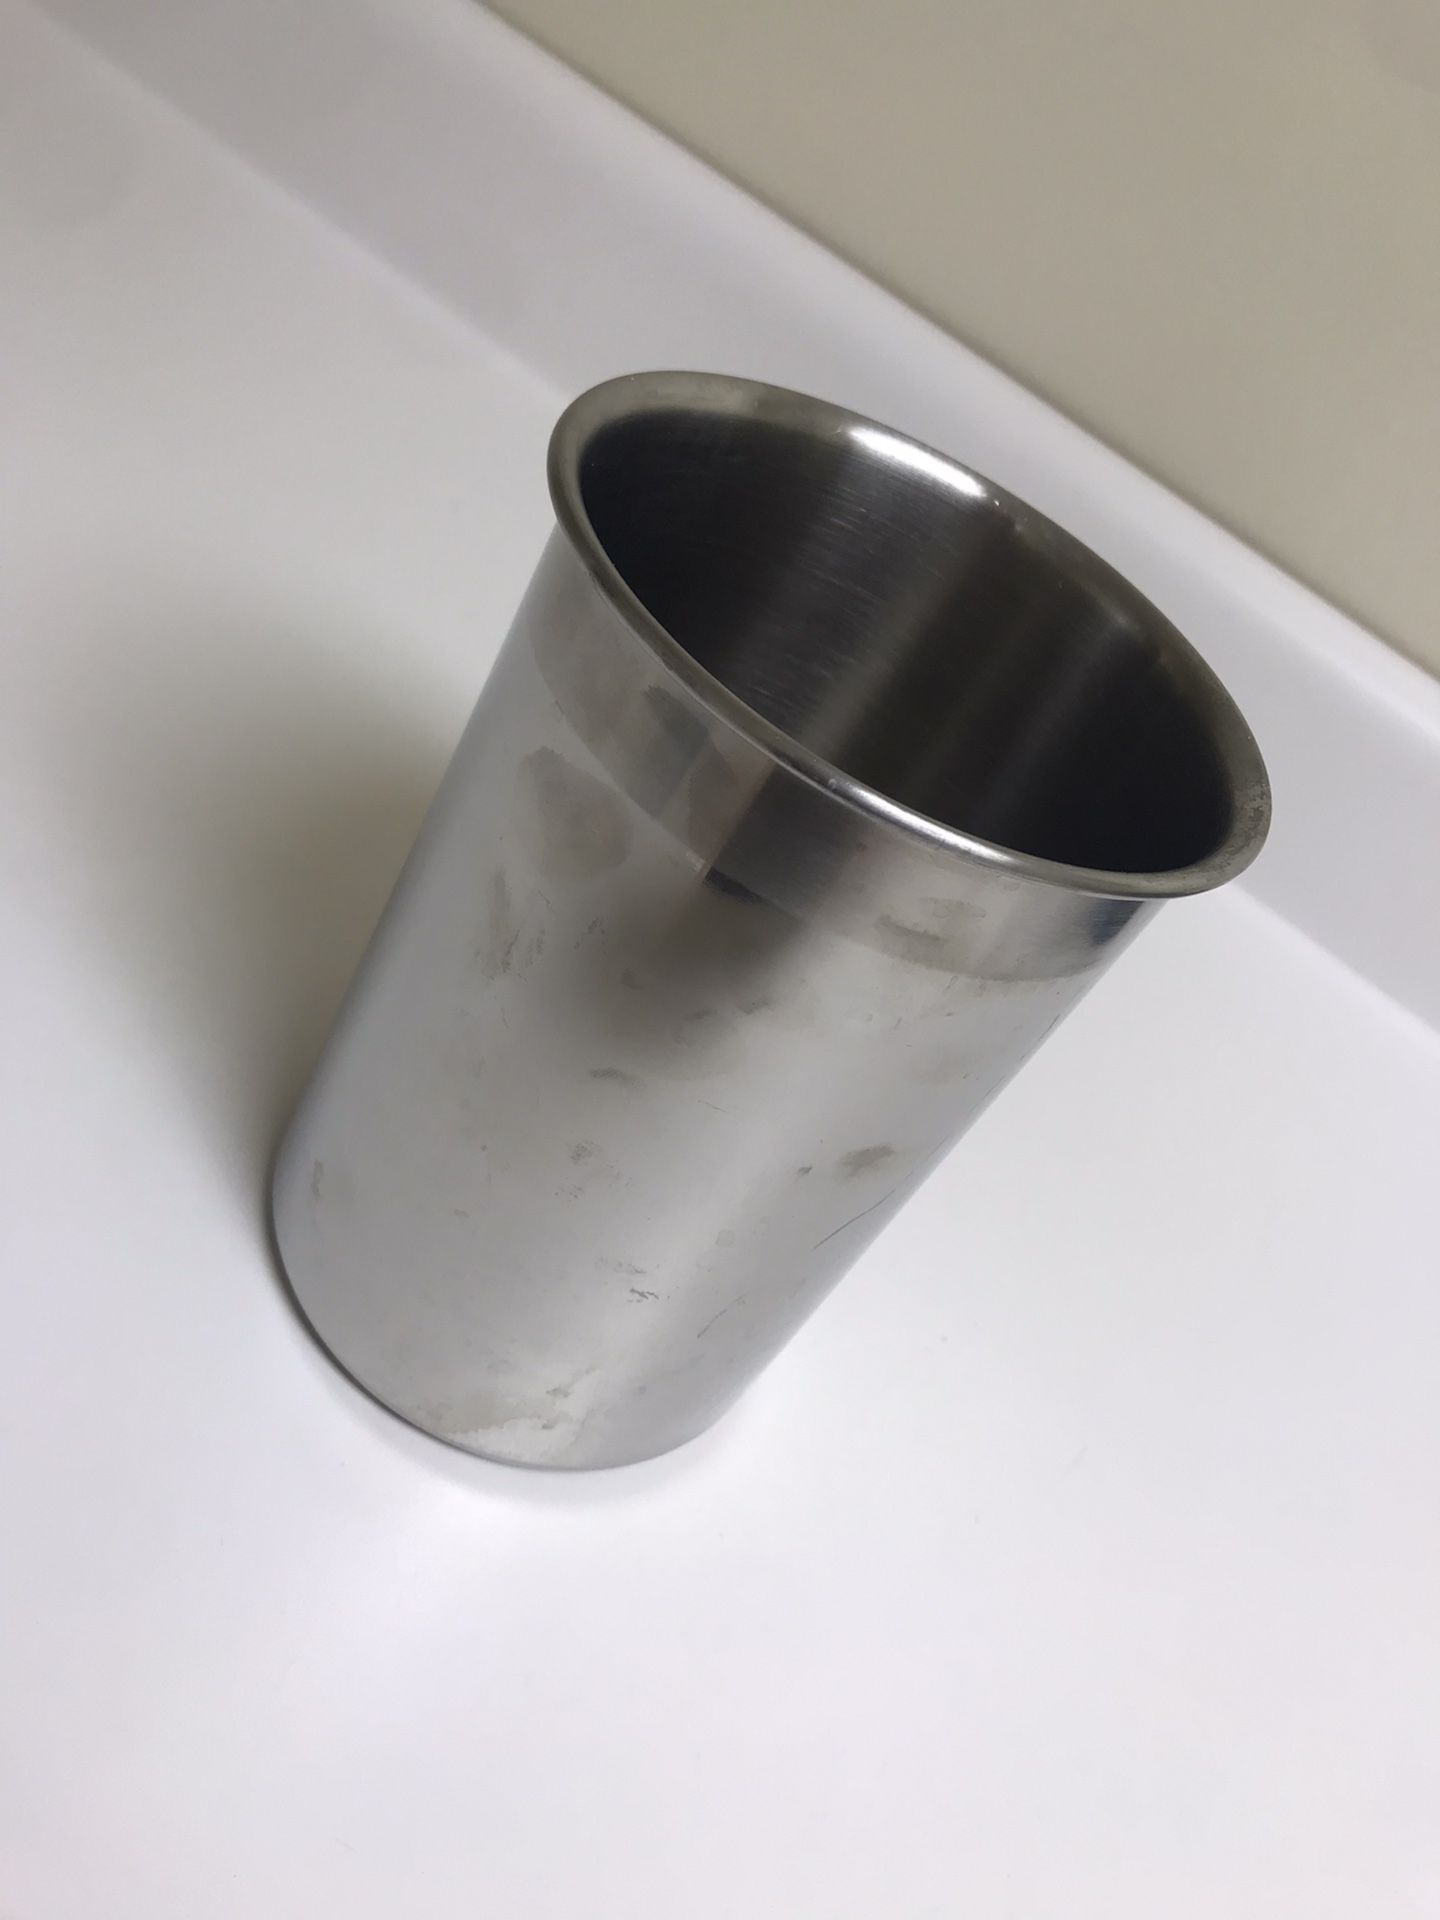 Oneida stainless steel canister / container